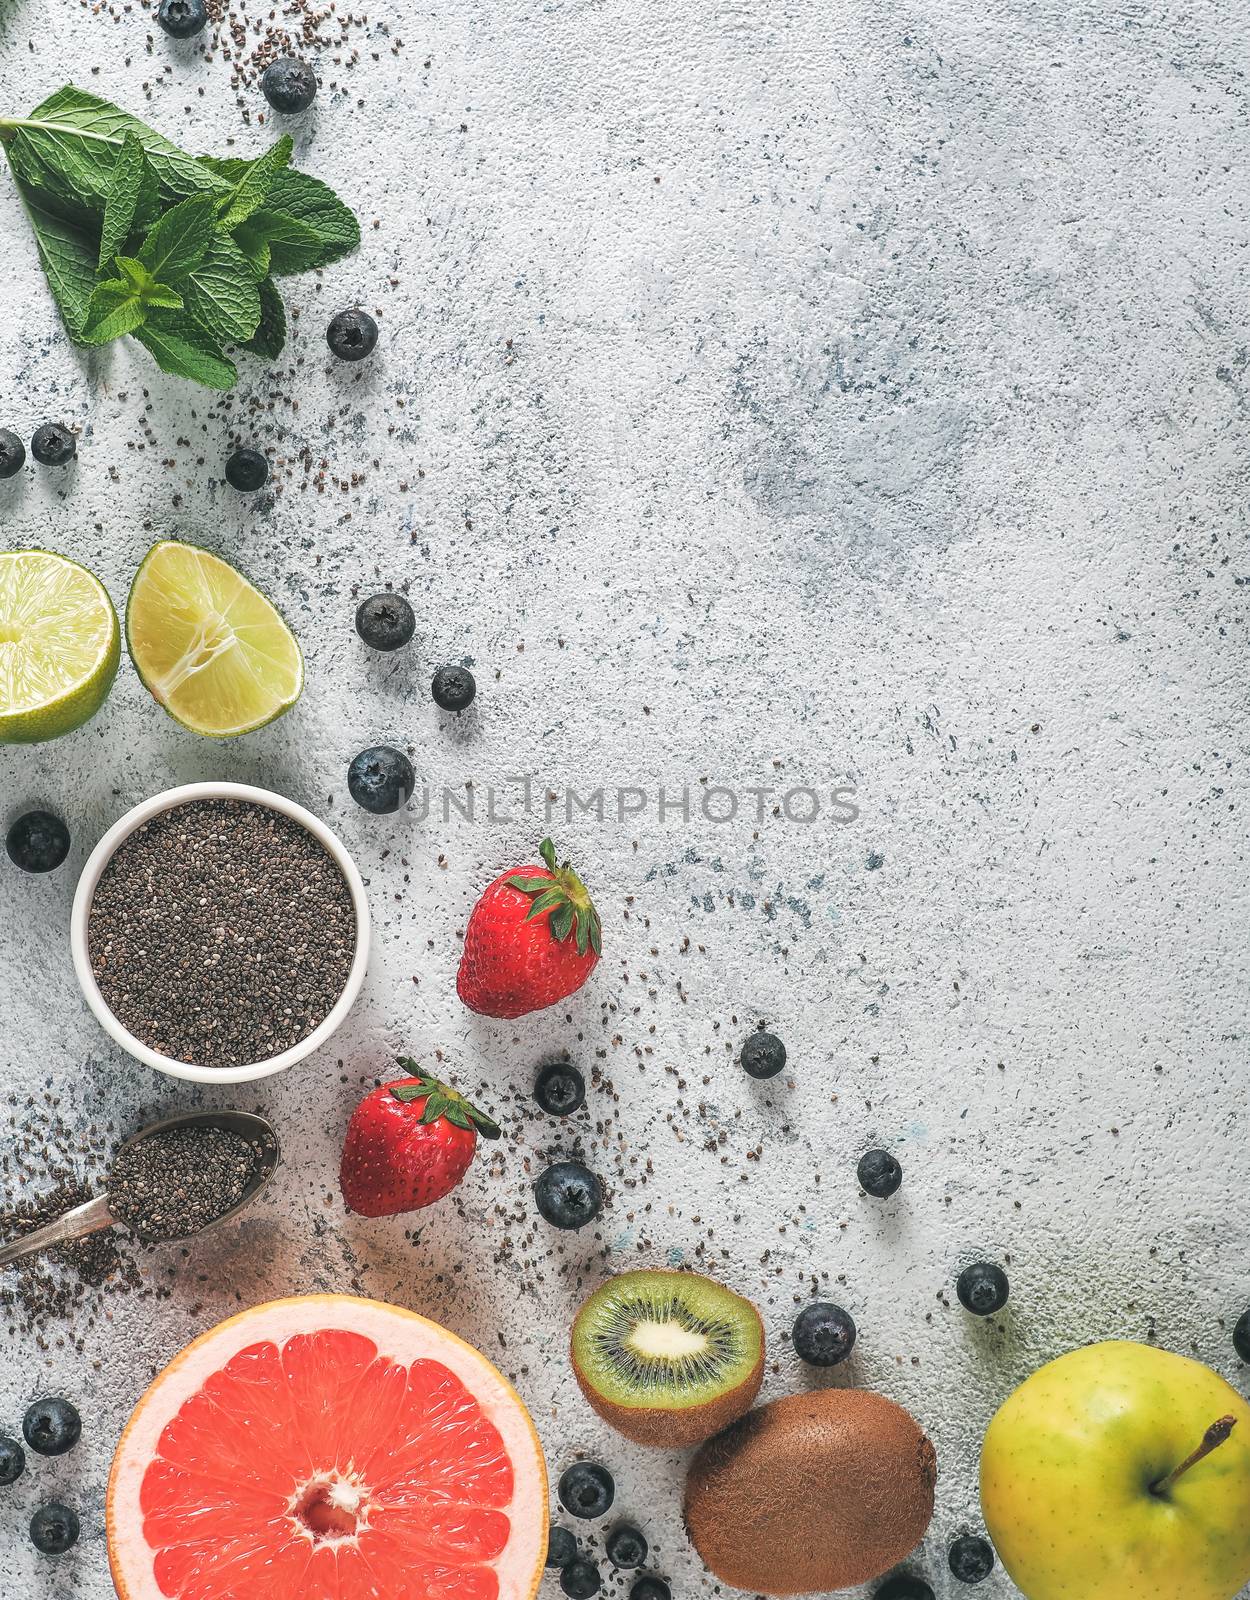 Ingredients for chia water and infused detox drink on gray background. Copy space. Above view,copy space. Fresh fruits, berries, chia seeds and mint. Healthy food, detox, diet, vegan concept. Vertical